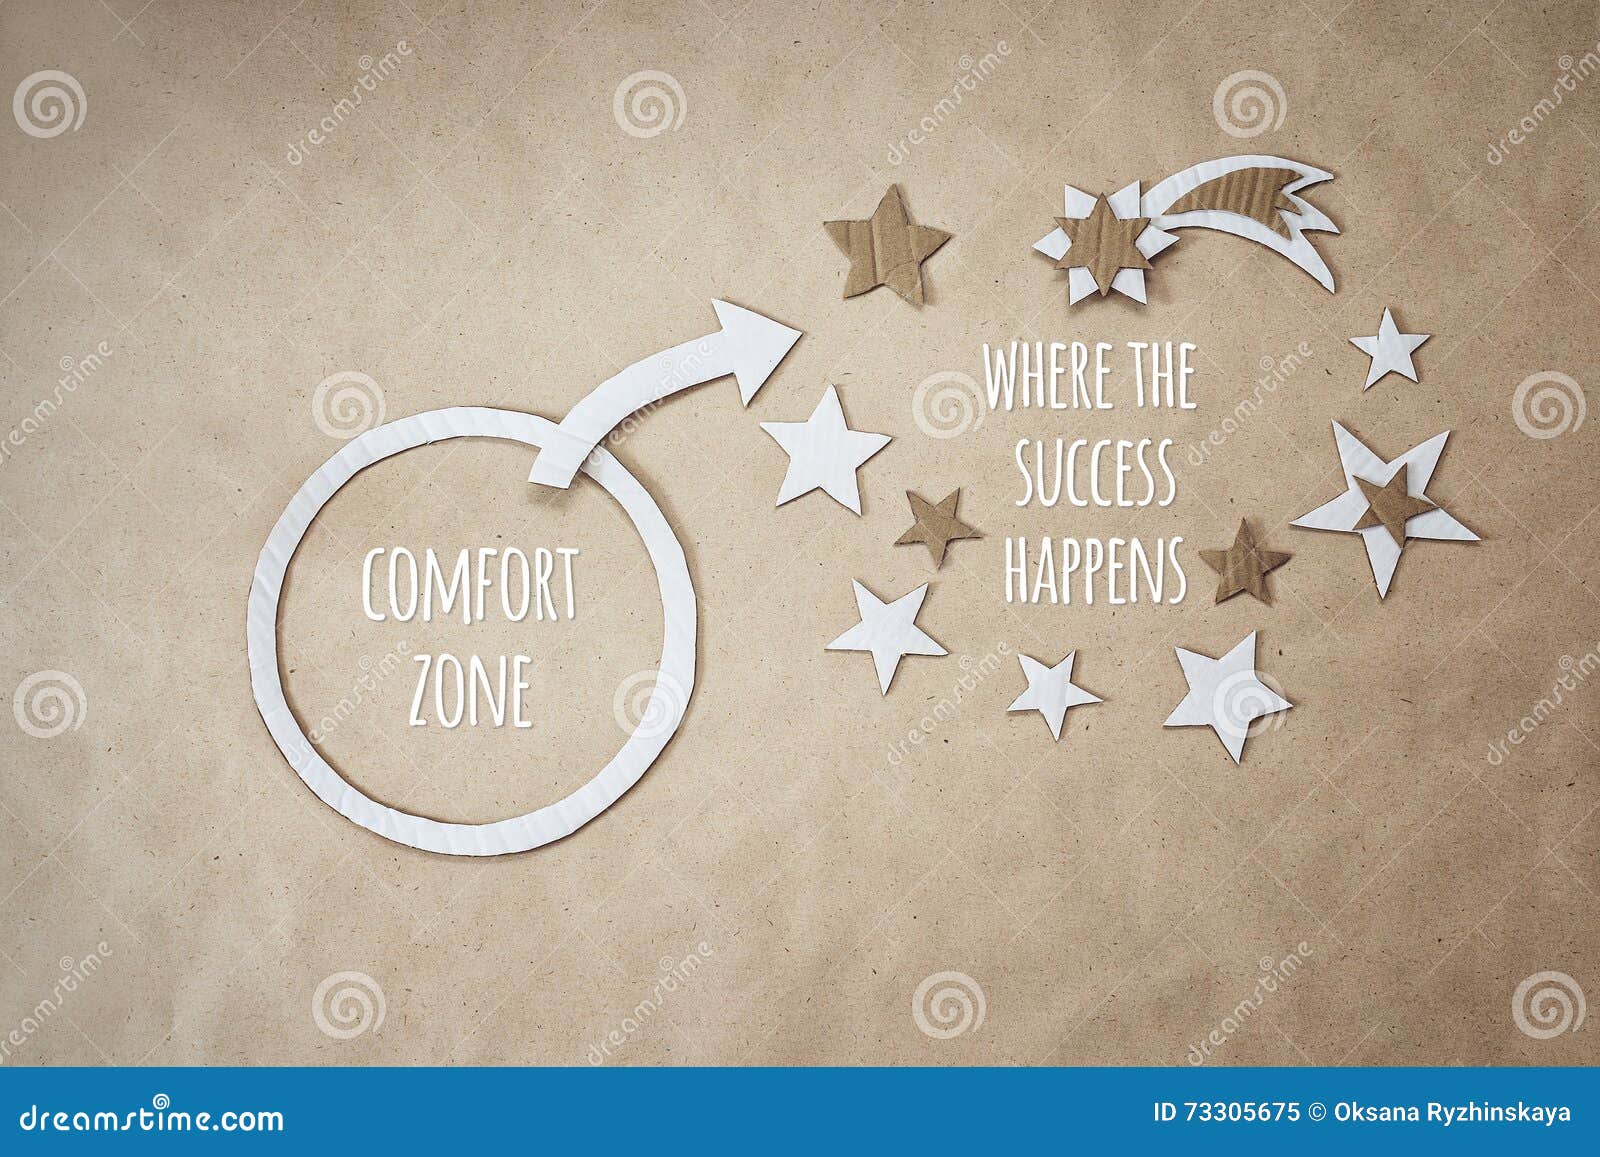 inspirational quote and encouragement to leave your comfort zone